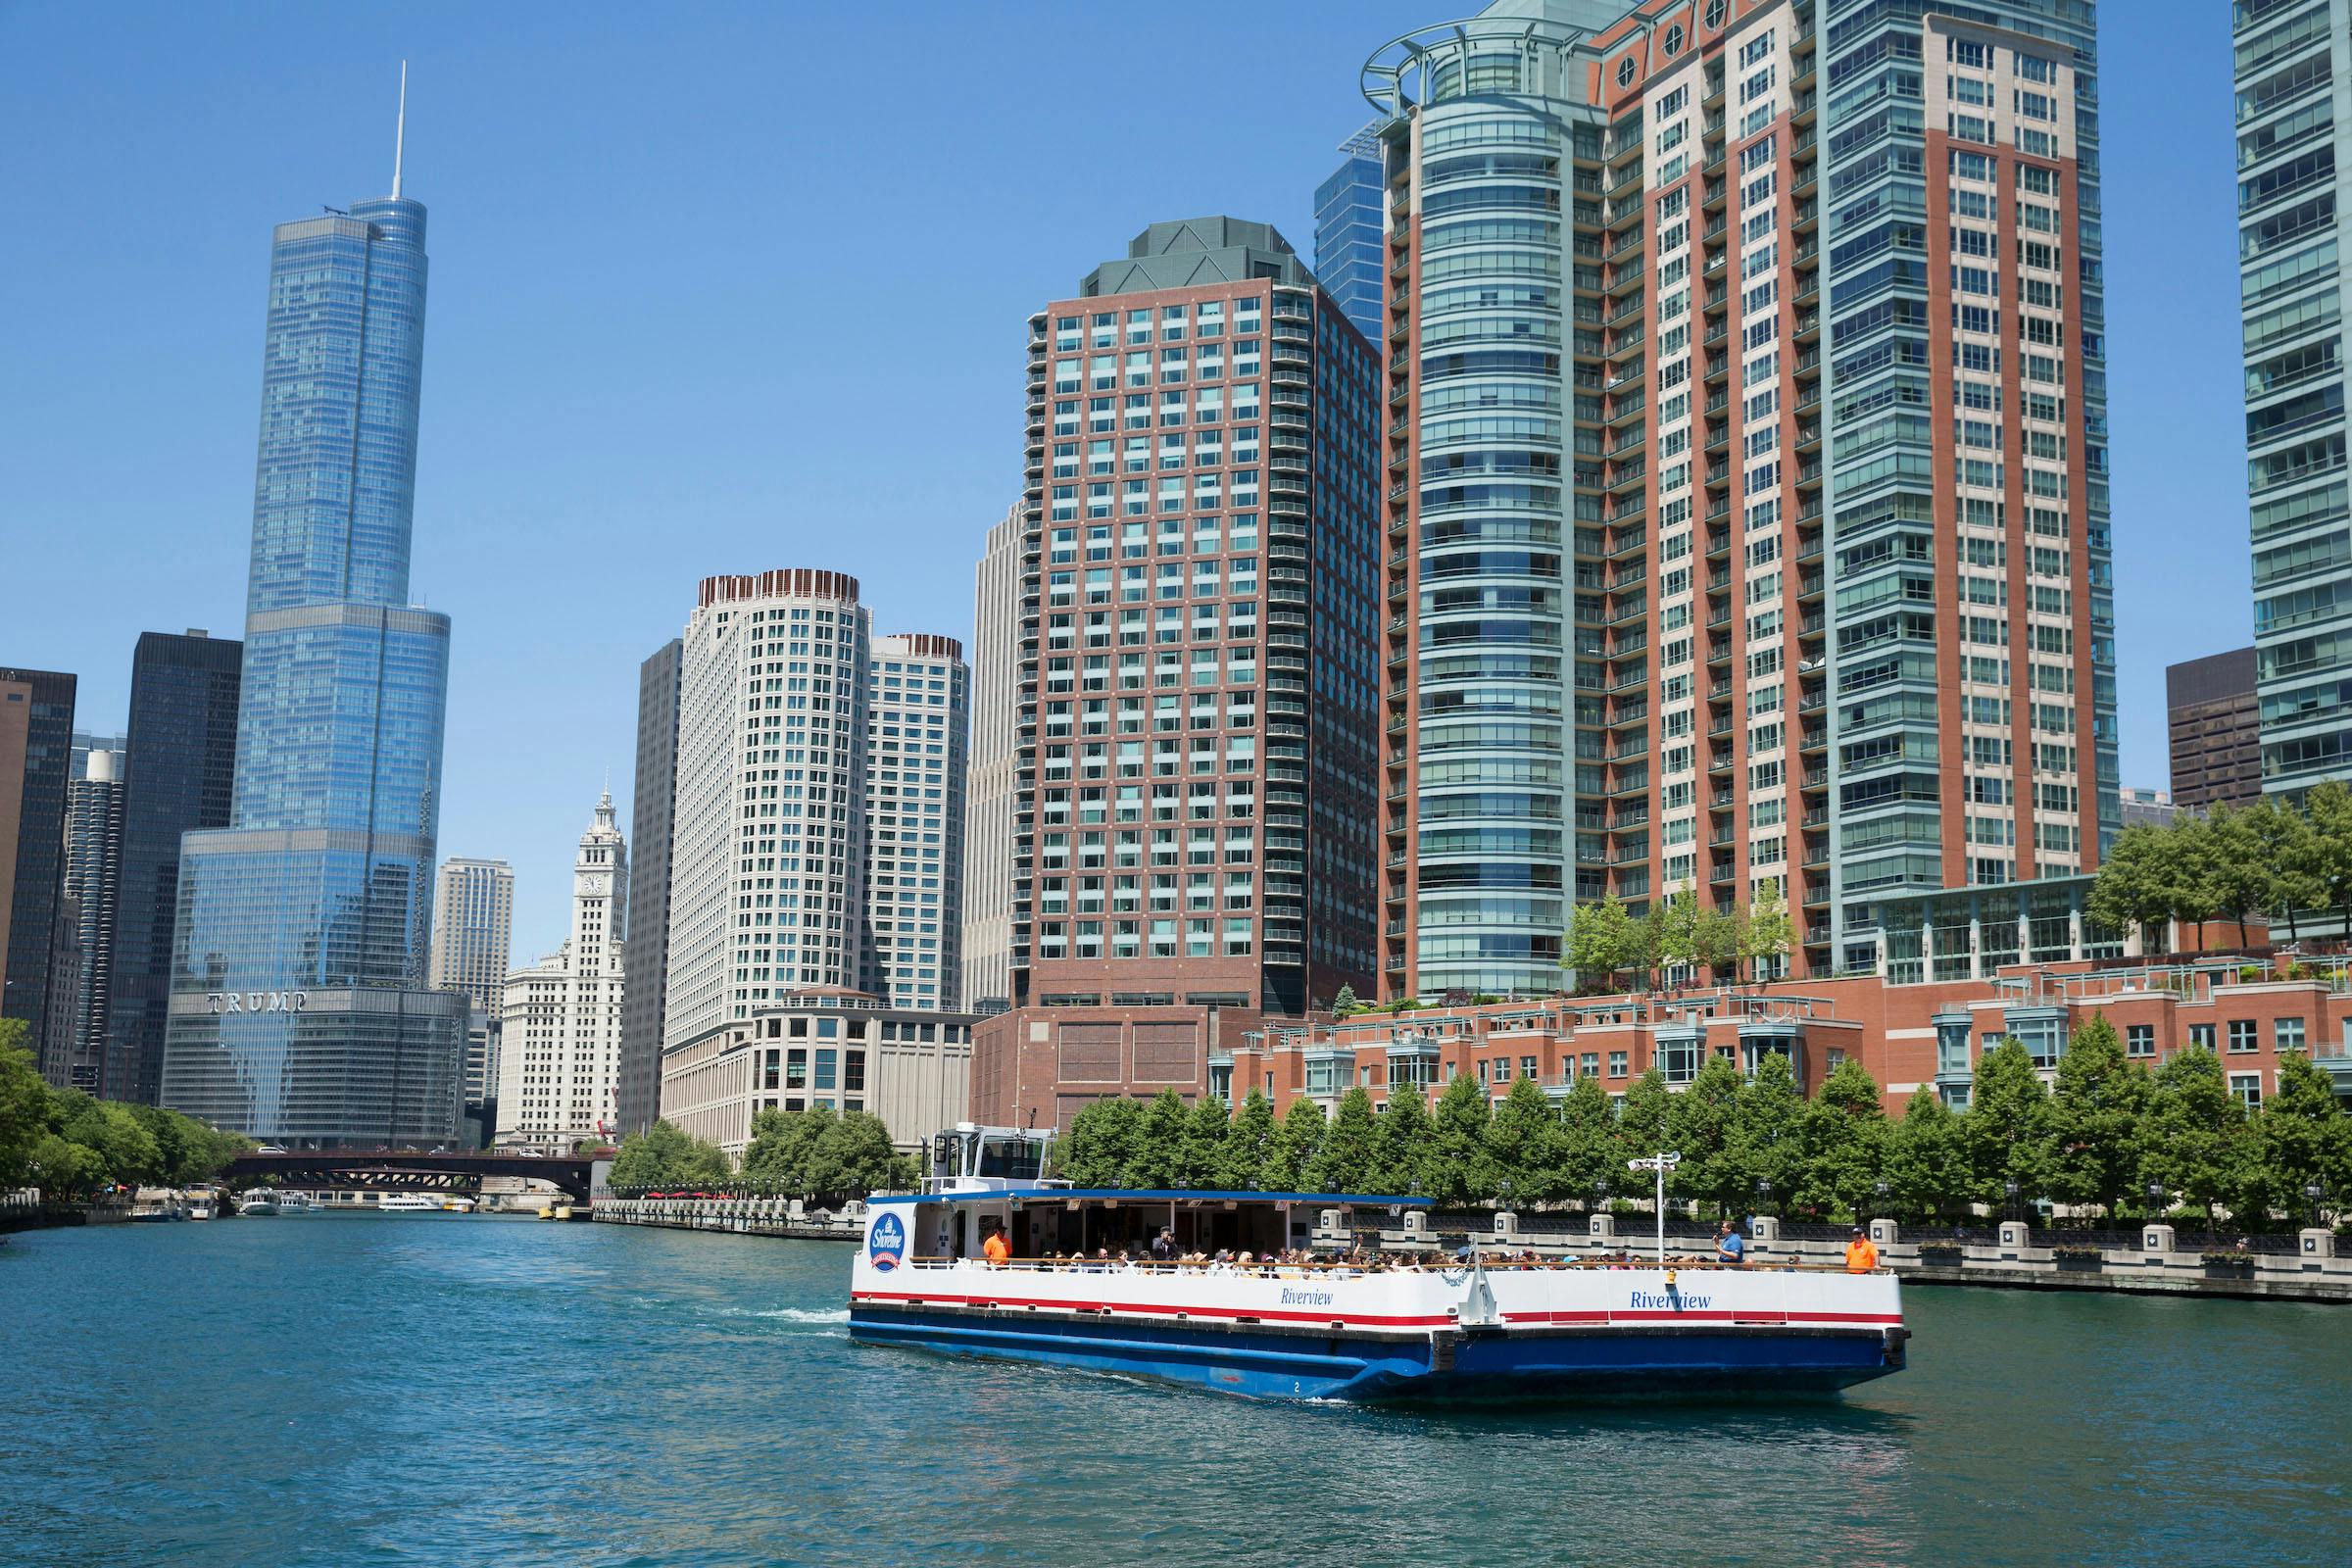 Architecture cruise on the Chicago River from Navy Pier